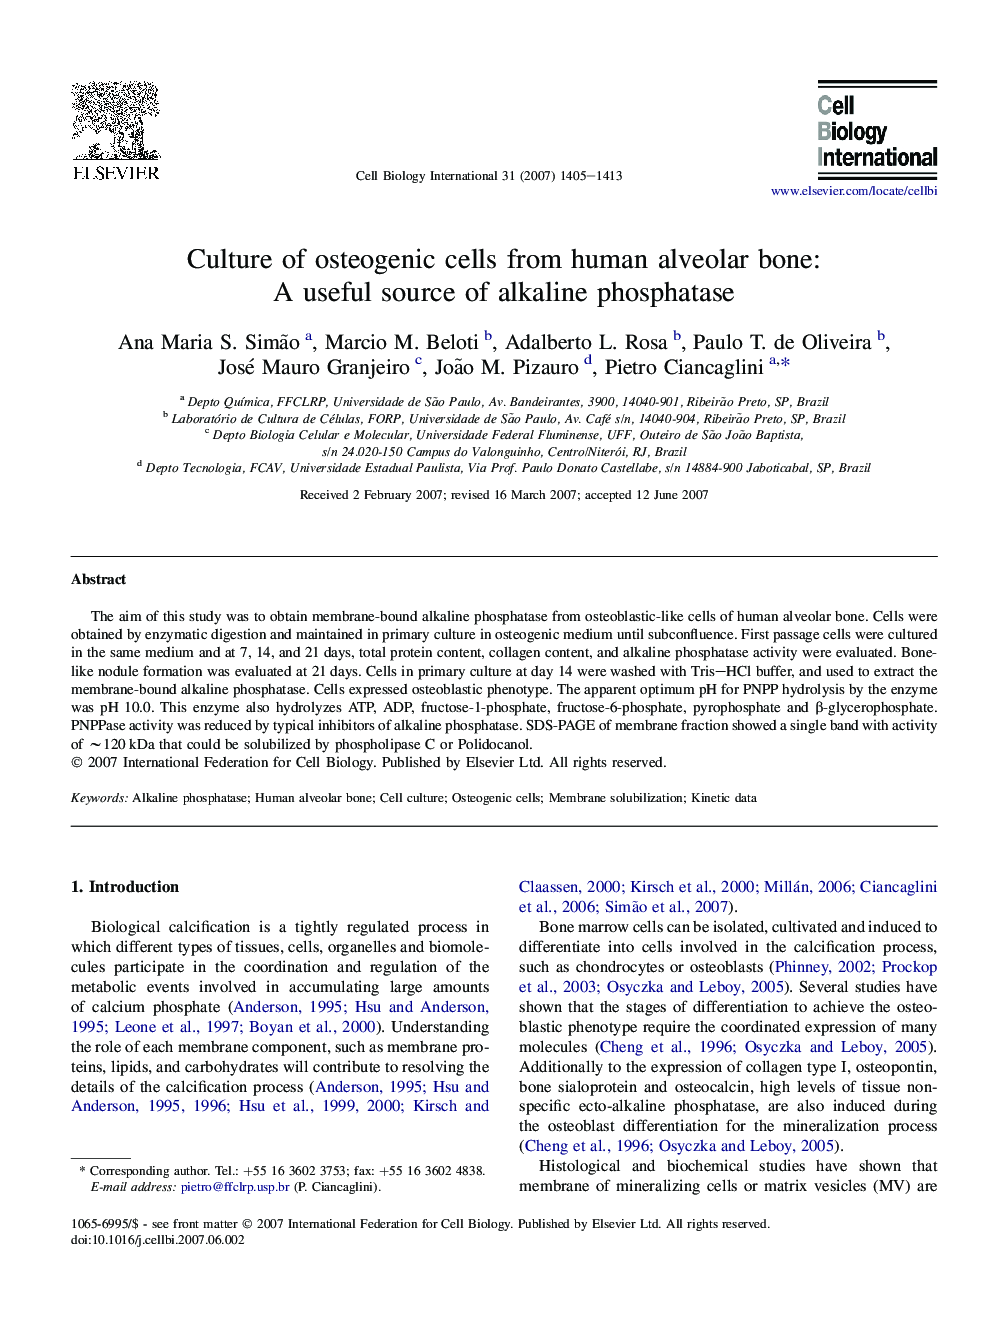 Culture of osteogenic cells from human alveolar bone: A useful source of alkaline phosphatase